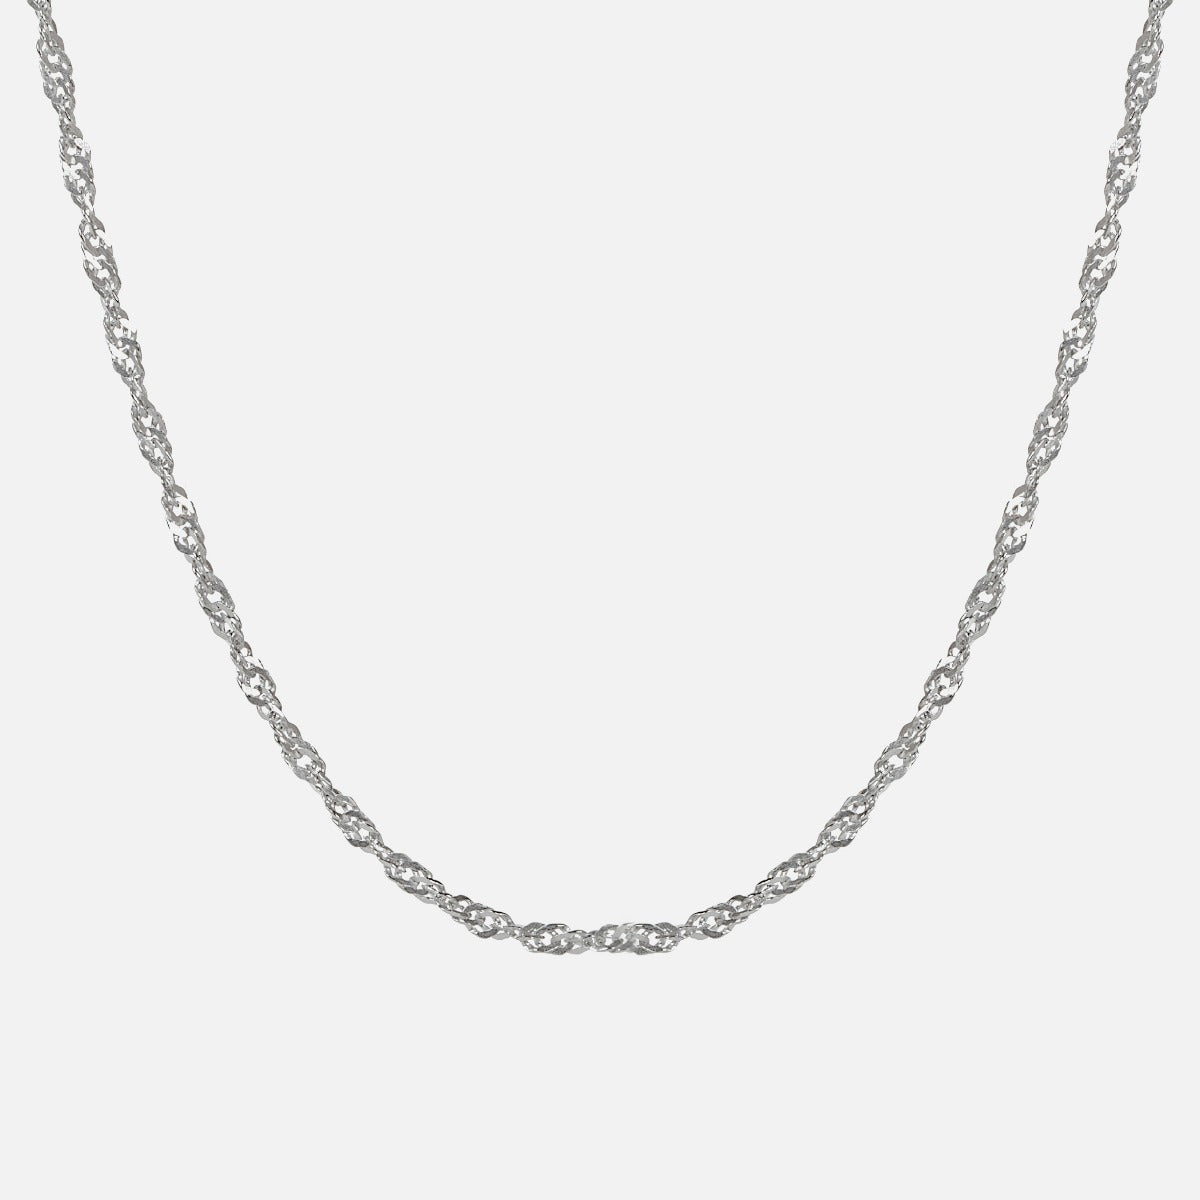 Sterling silver chain with twisted links 18 inches 